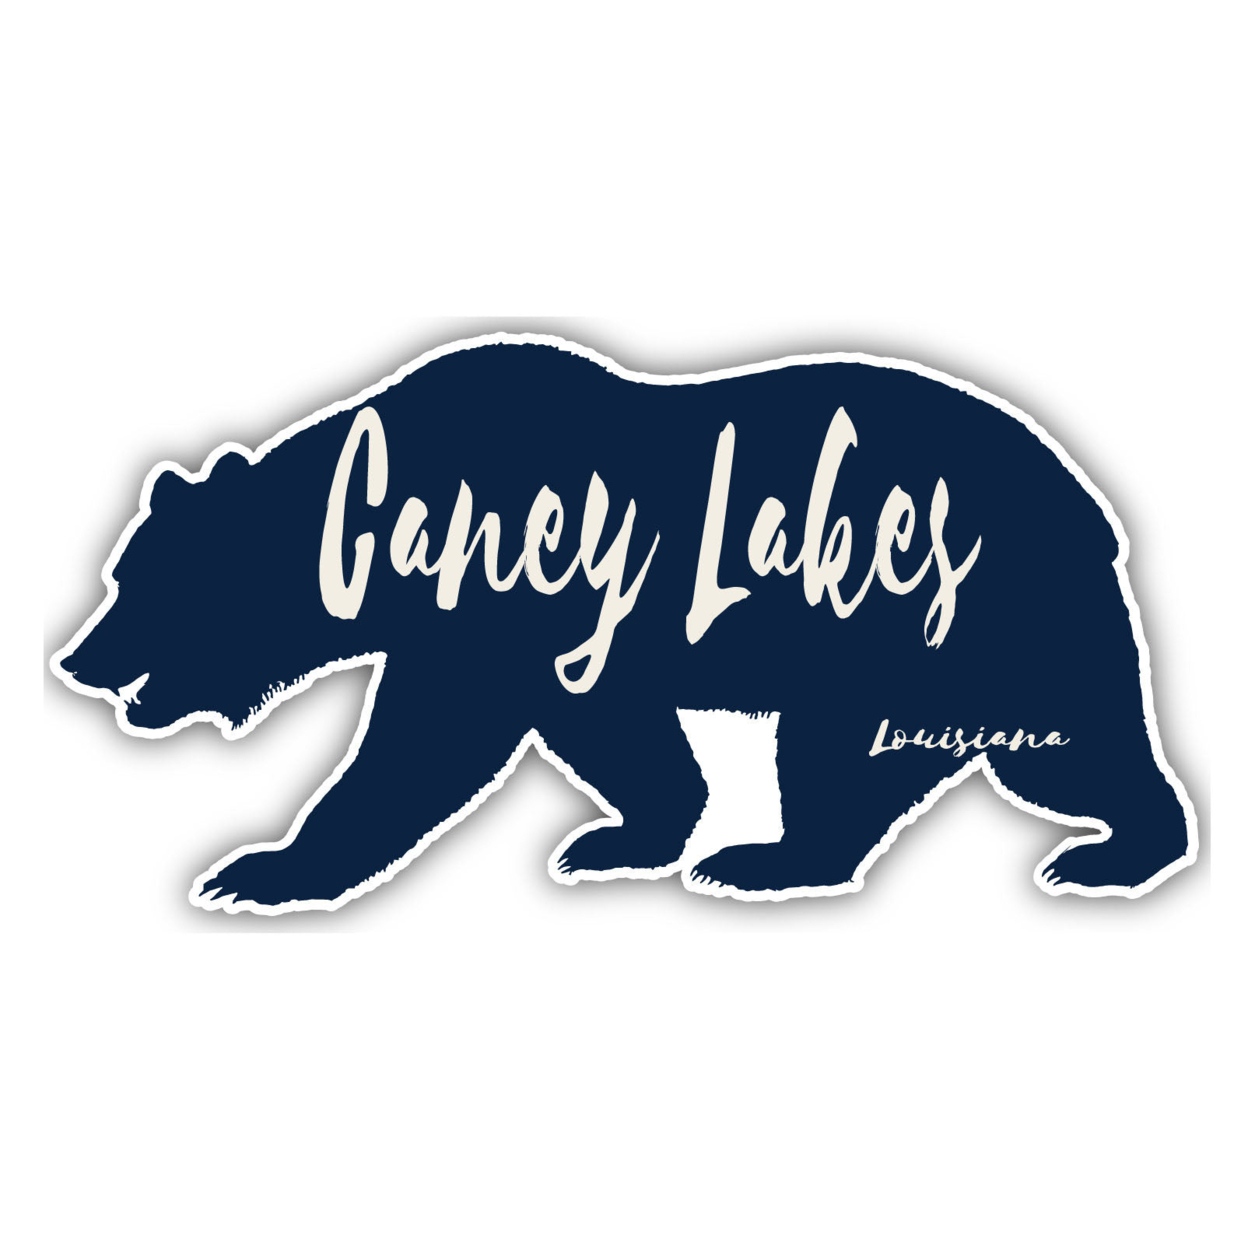 Caney Lakes Louisiana Souvenir Decorative Stickers (Choose Theme And Size) - 4-Pack, 4-Inch, Bear